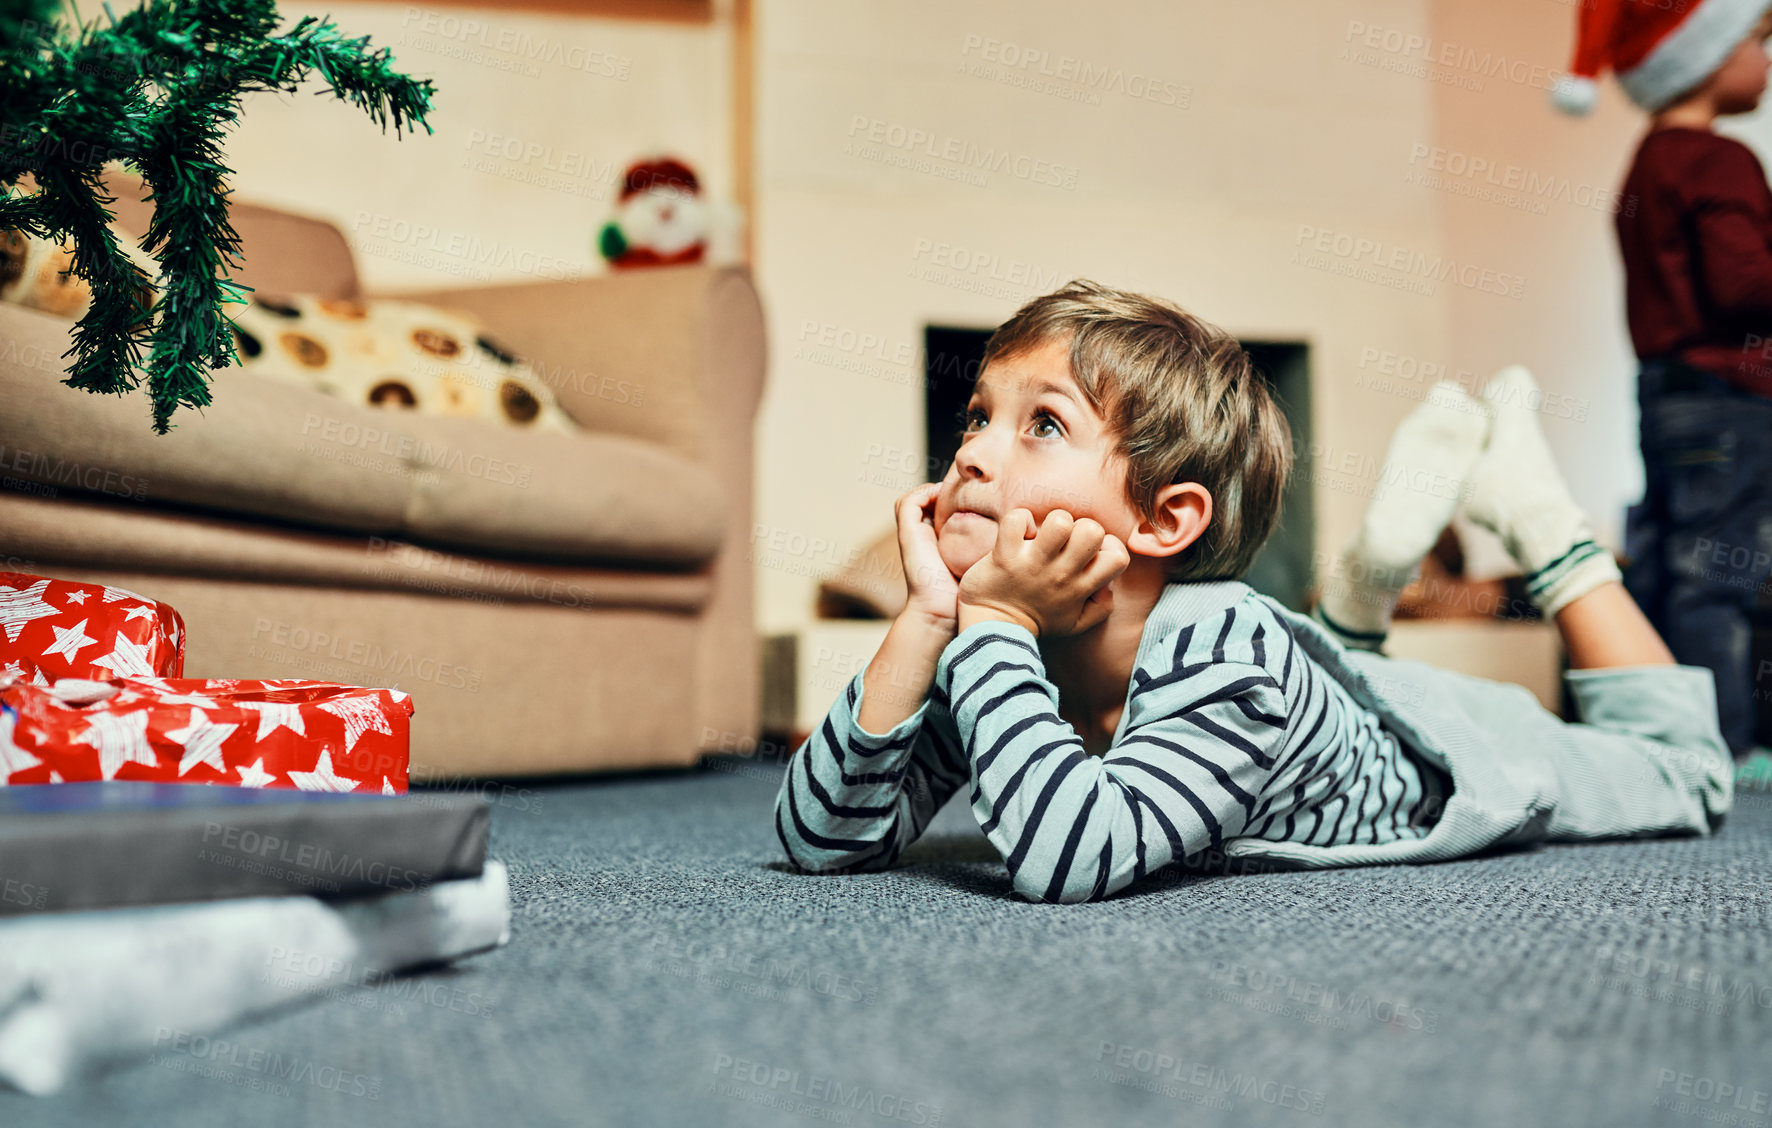 Buy stock photo Shot of an adorable little boy lying down next to the Christmas tree at home